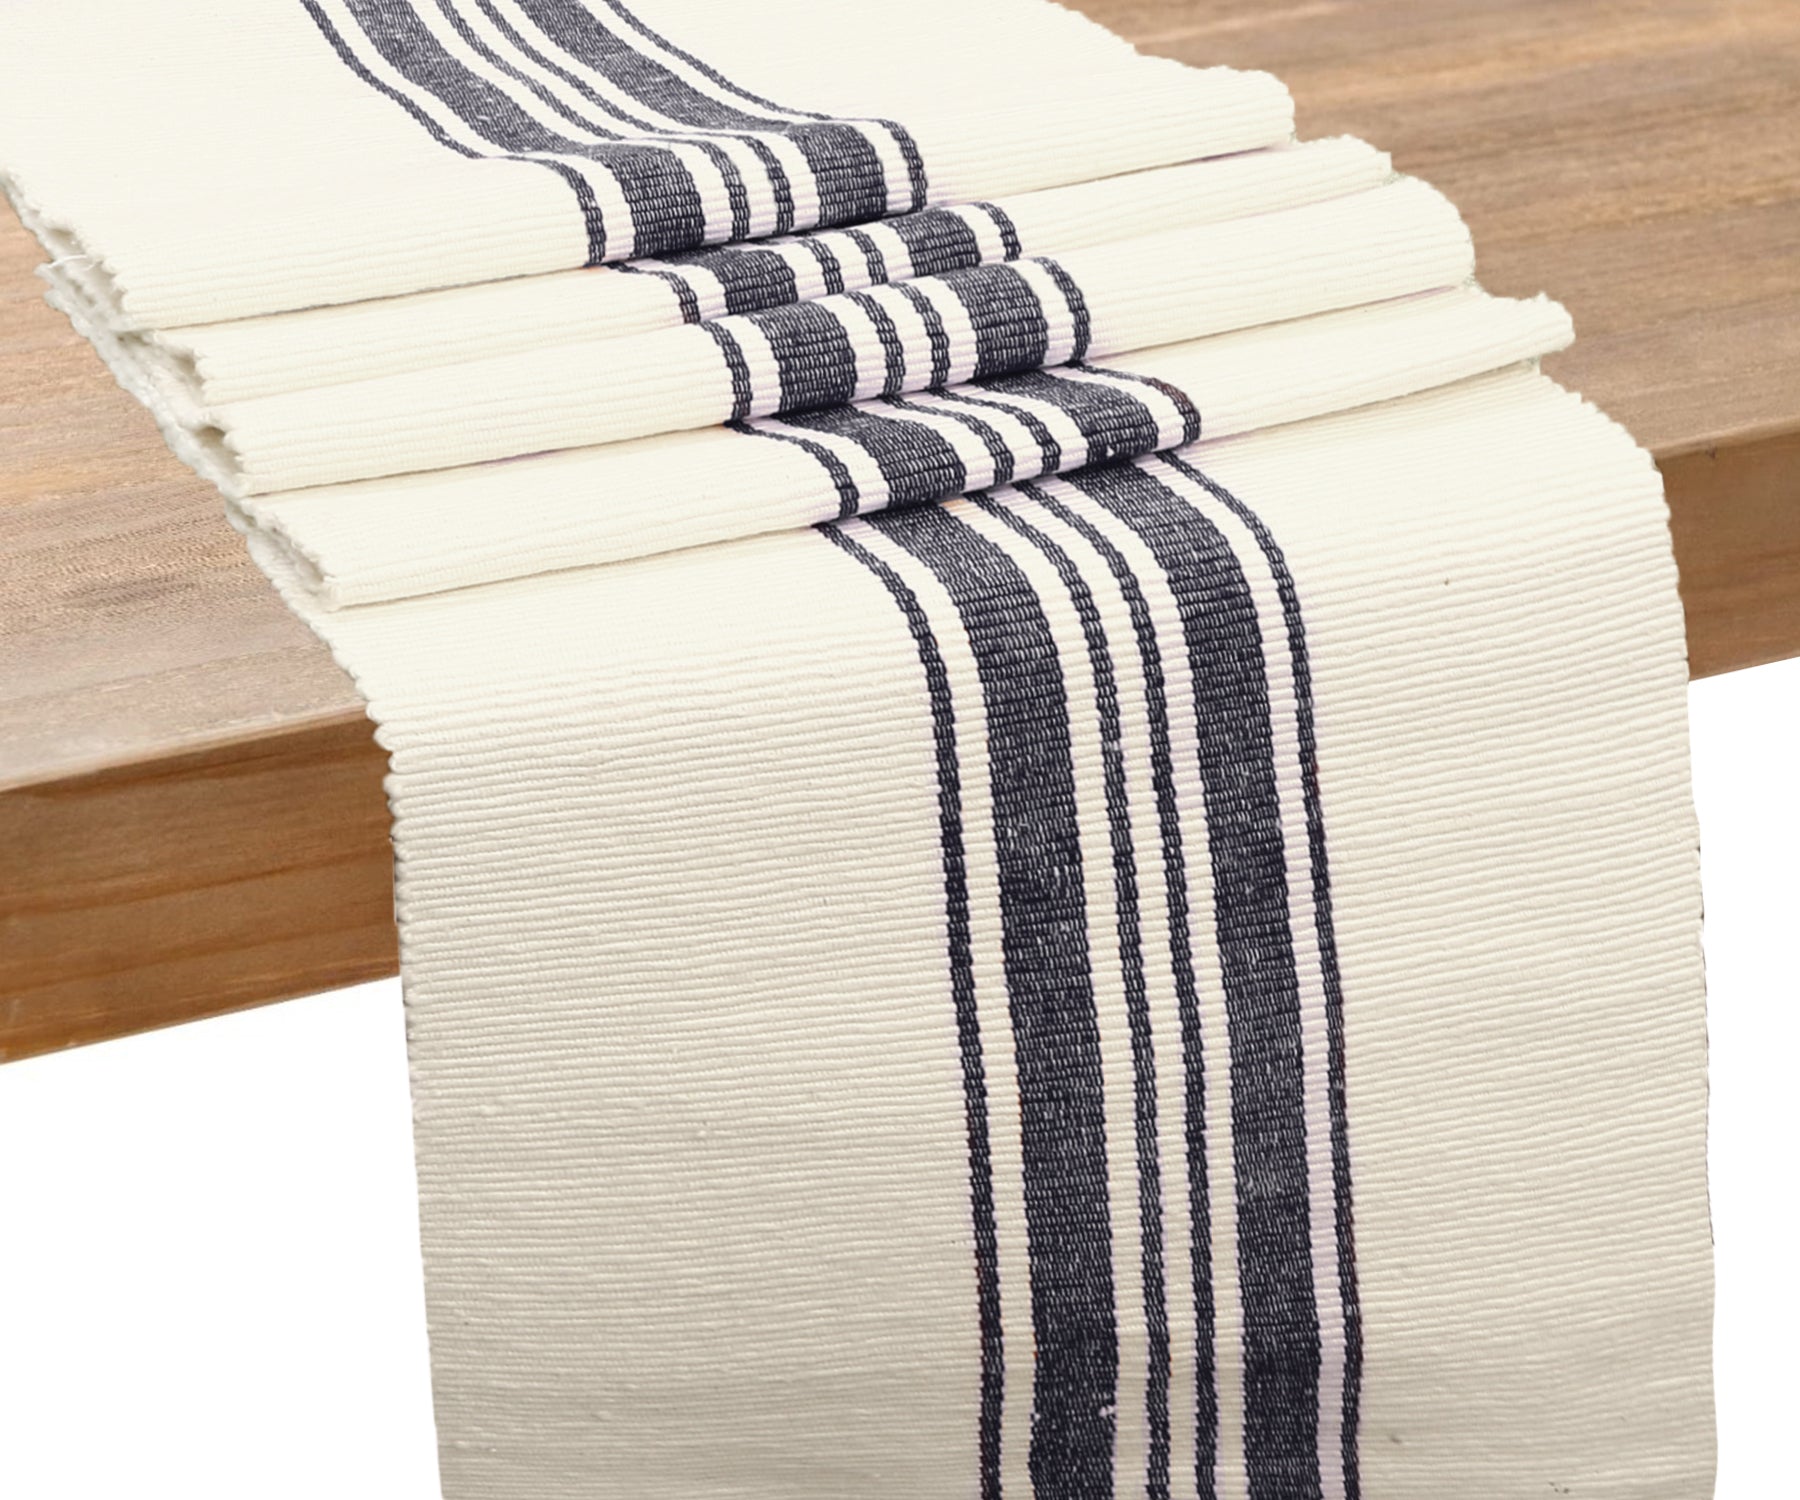 Achieve a farmhouse-inspired look with a striped table runner, enhancing your dining space.